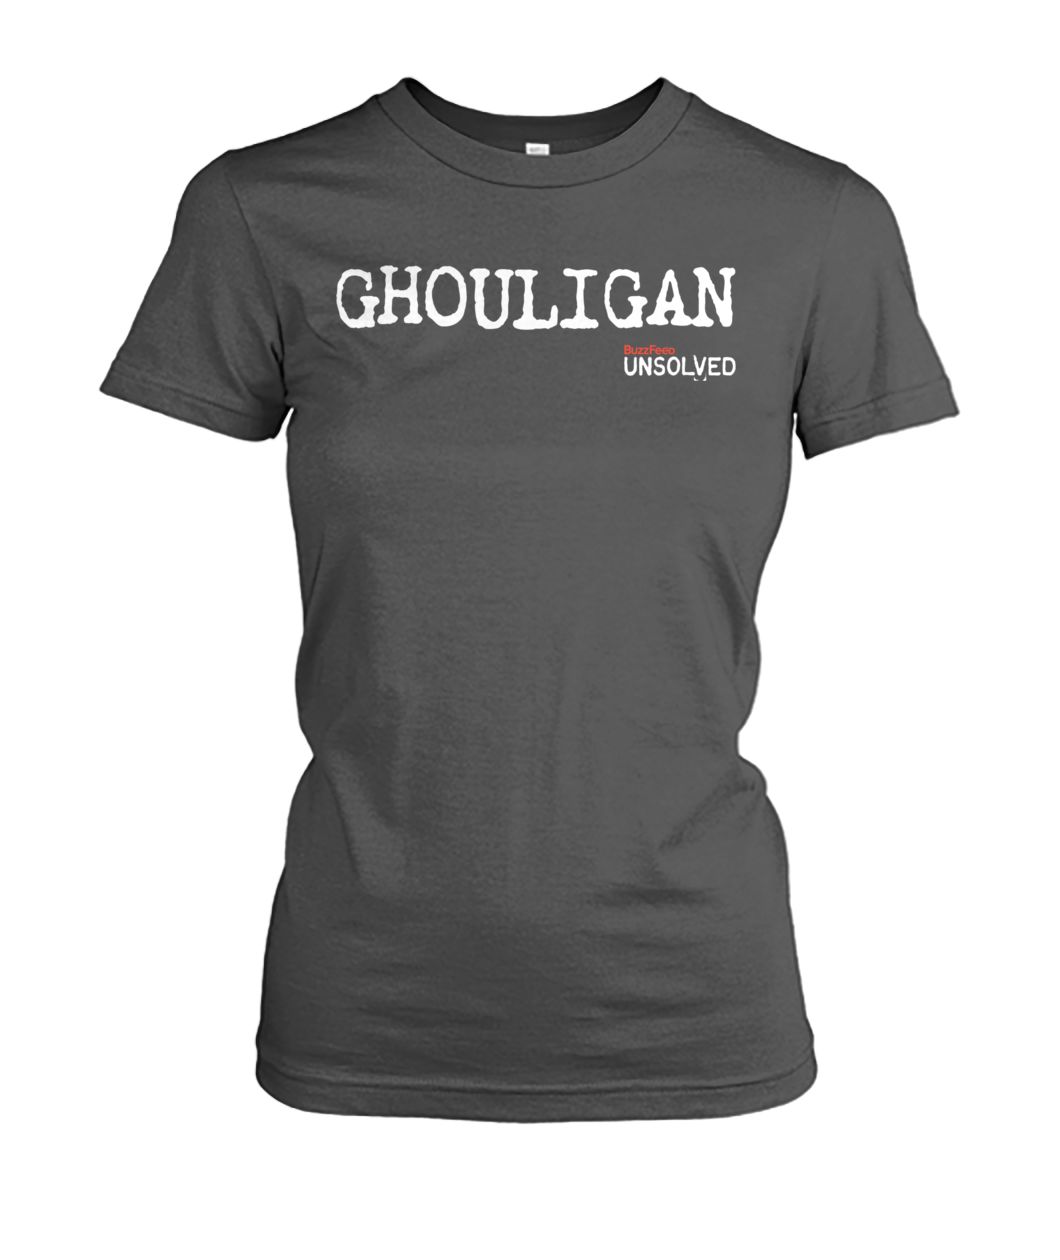 Buzzfeed unsolved ghouligan women's crew tee